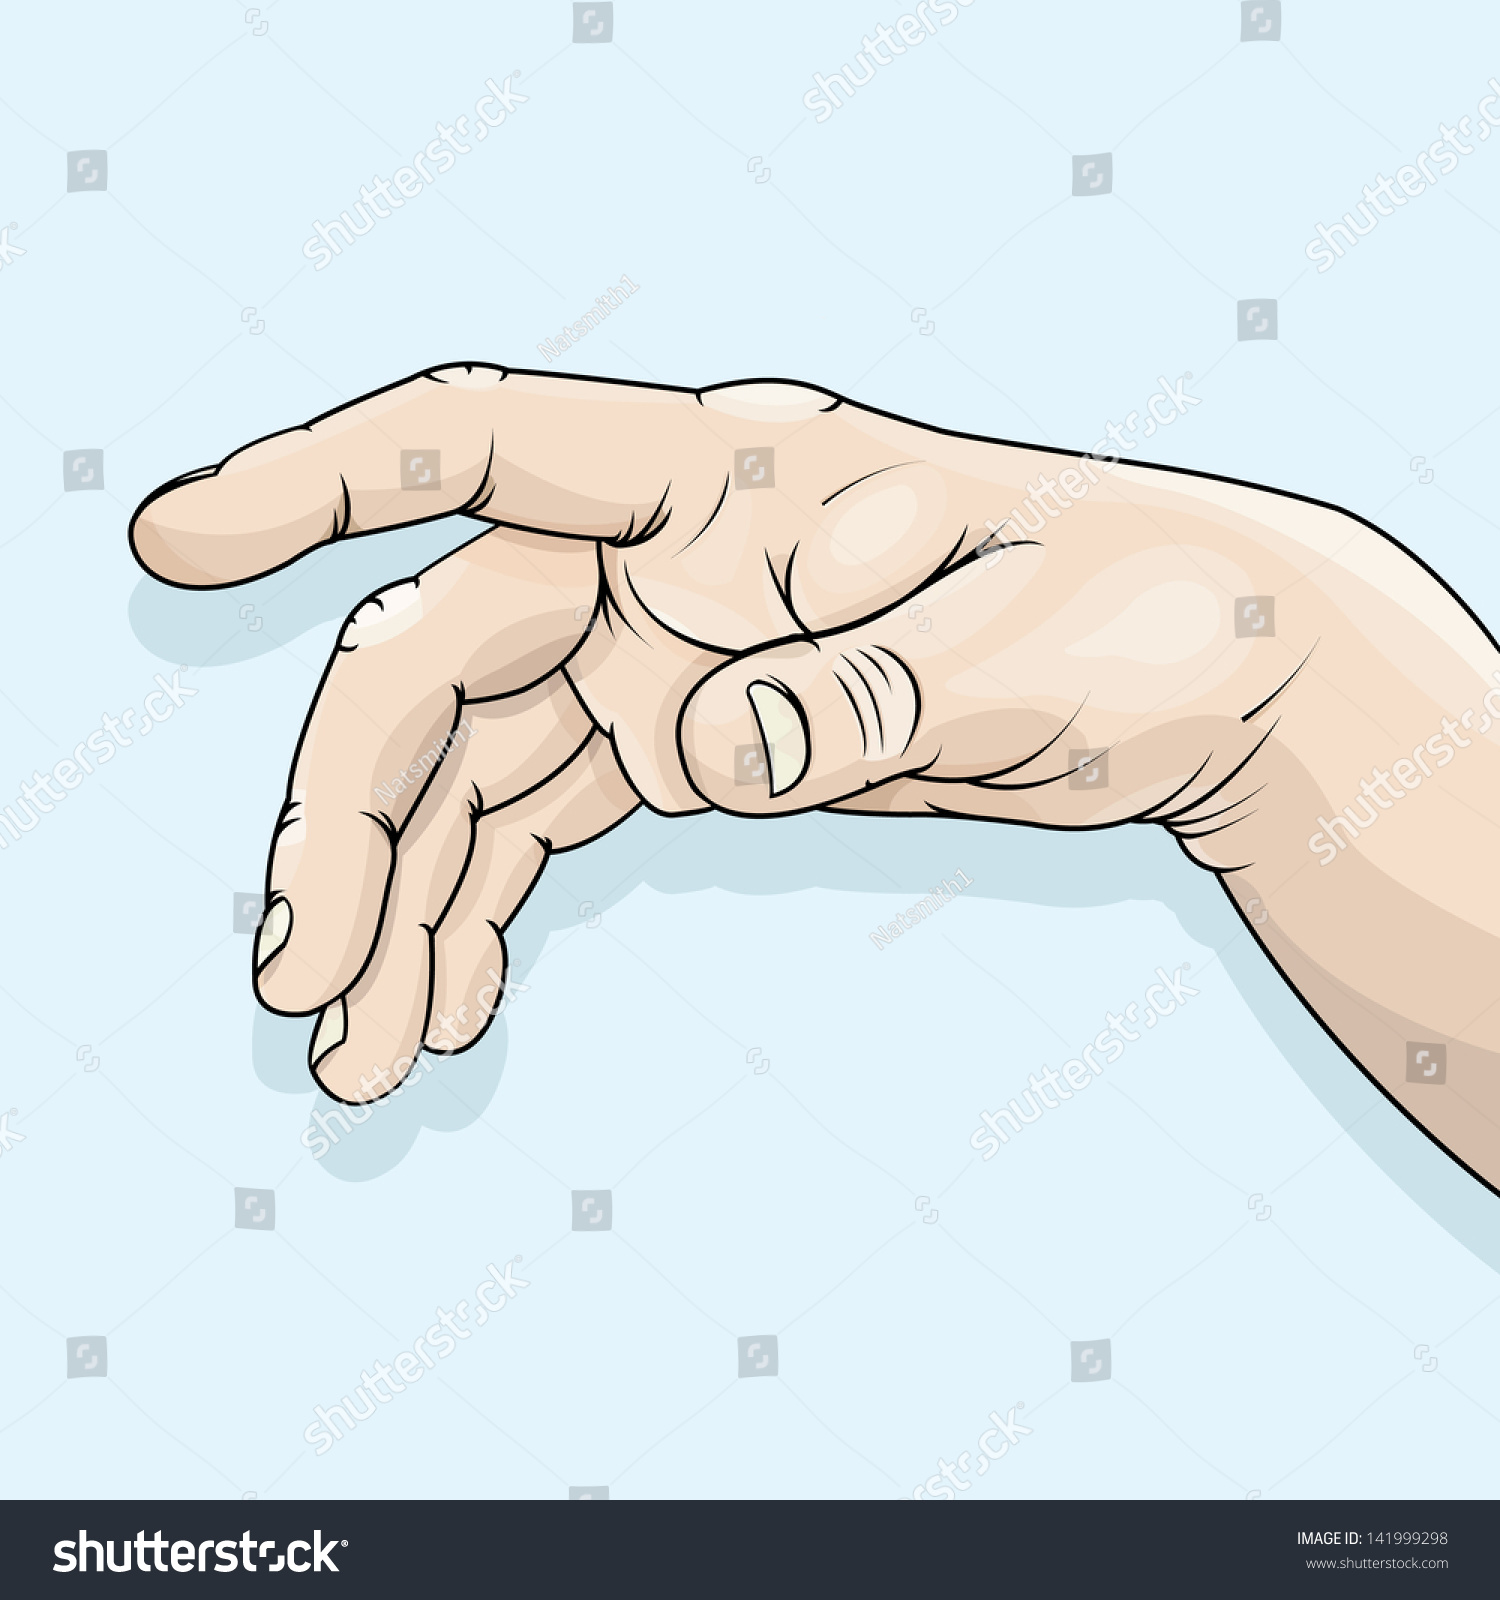 Vector Drawing Of A Relaxed Hand/Relaxed Hand/ Easy To Edit Layers, No